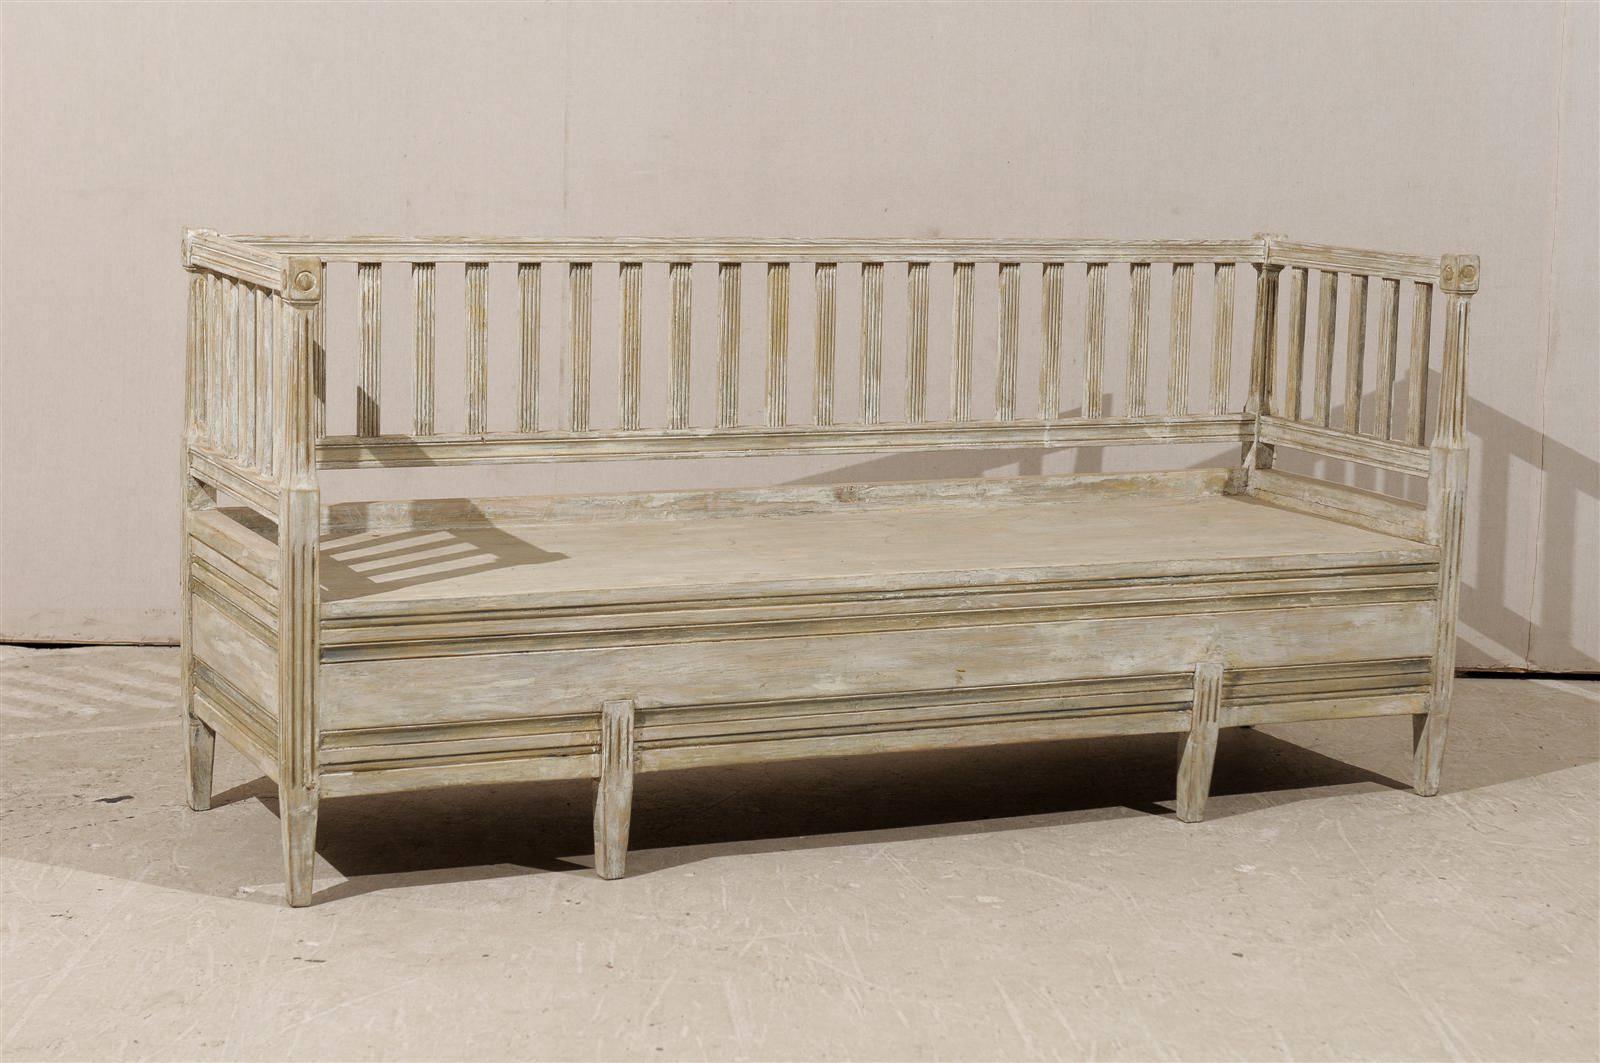 A Swedish late Gustavian Period, early 19th century painted wood bench. This Swedish painted wood bench features a linear profile with clean lines and pastel colors typical of the Swedish taste for light and soft colors which help bringing light to